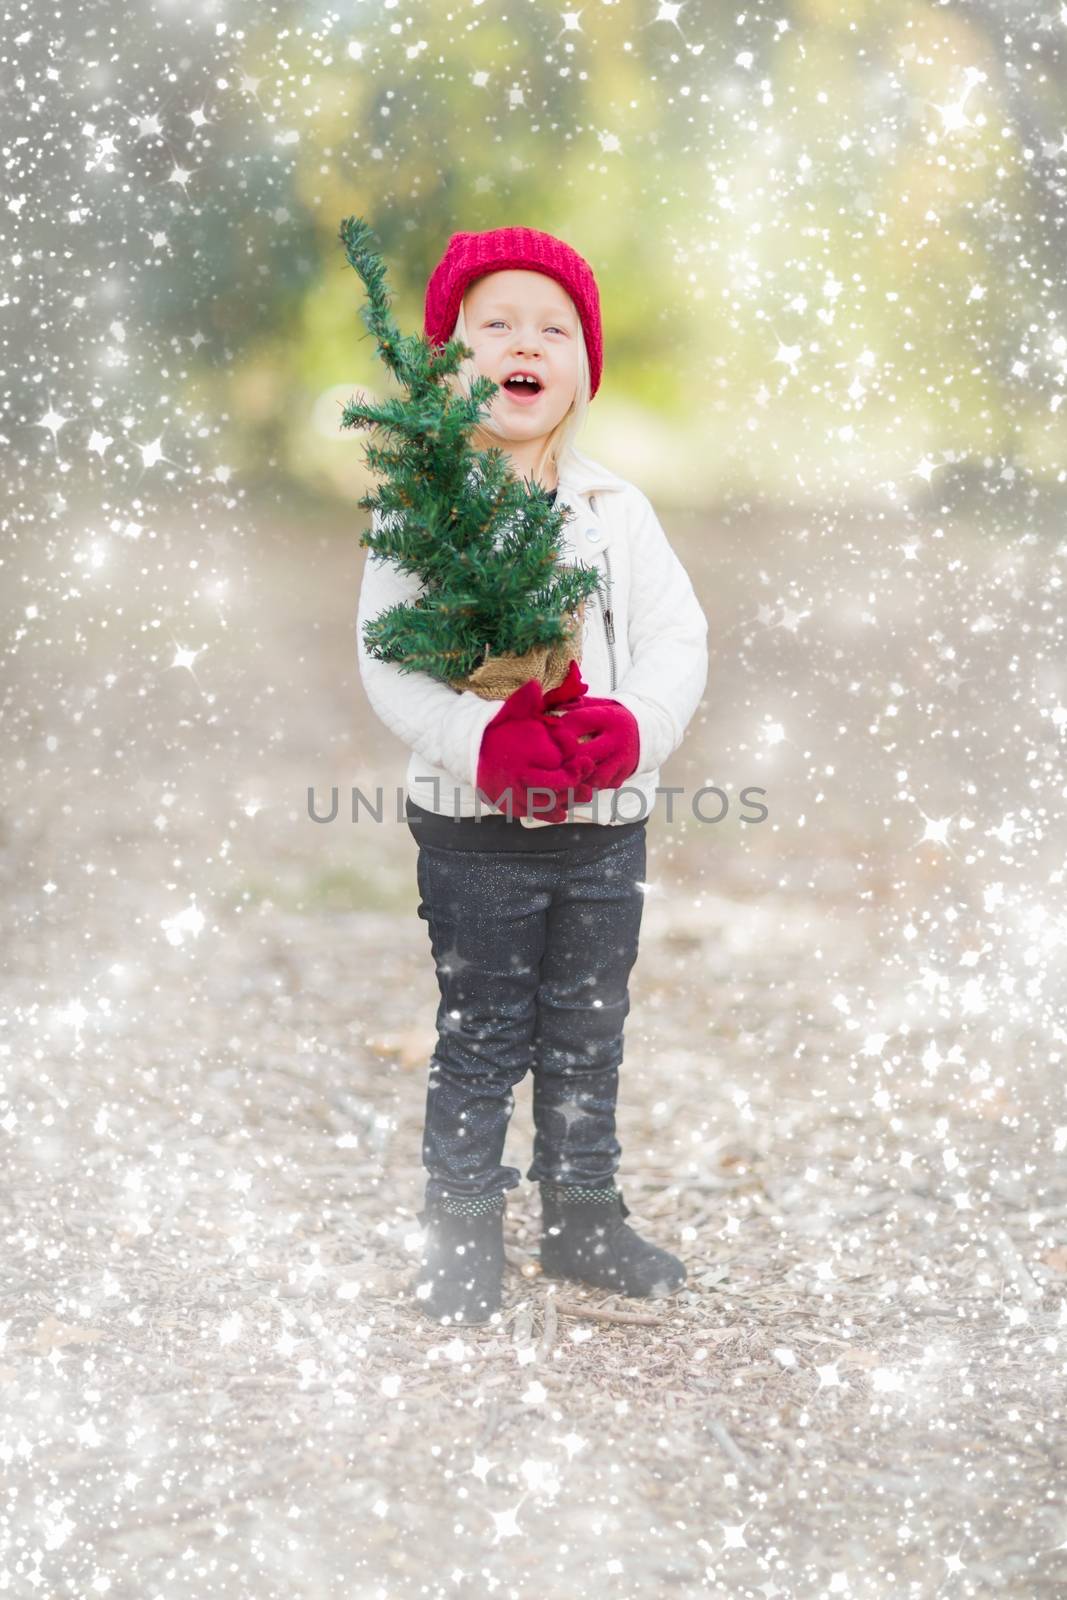 Baby Girl In Mittens Holding Small Christmas Tree with Snow Effe by Feverpitched